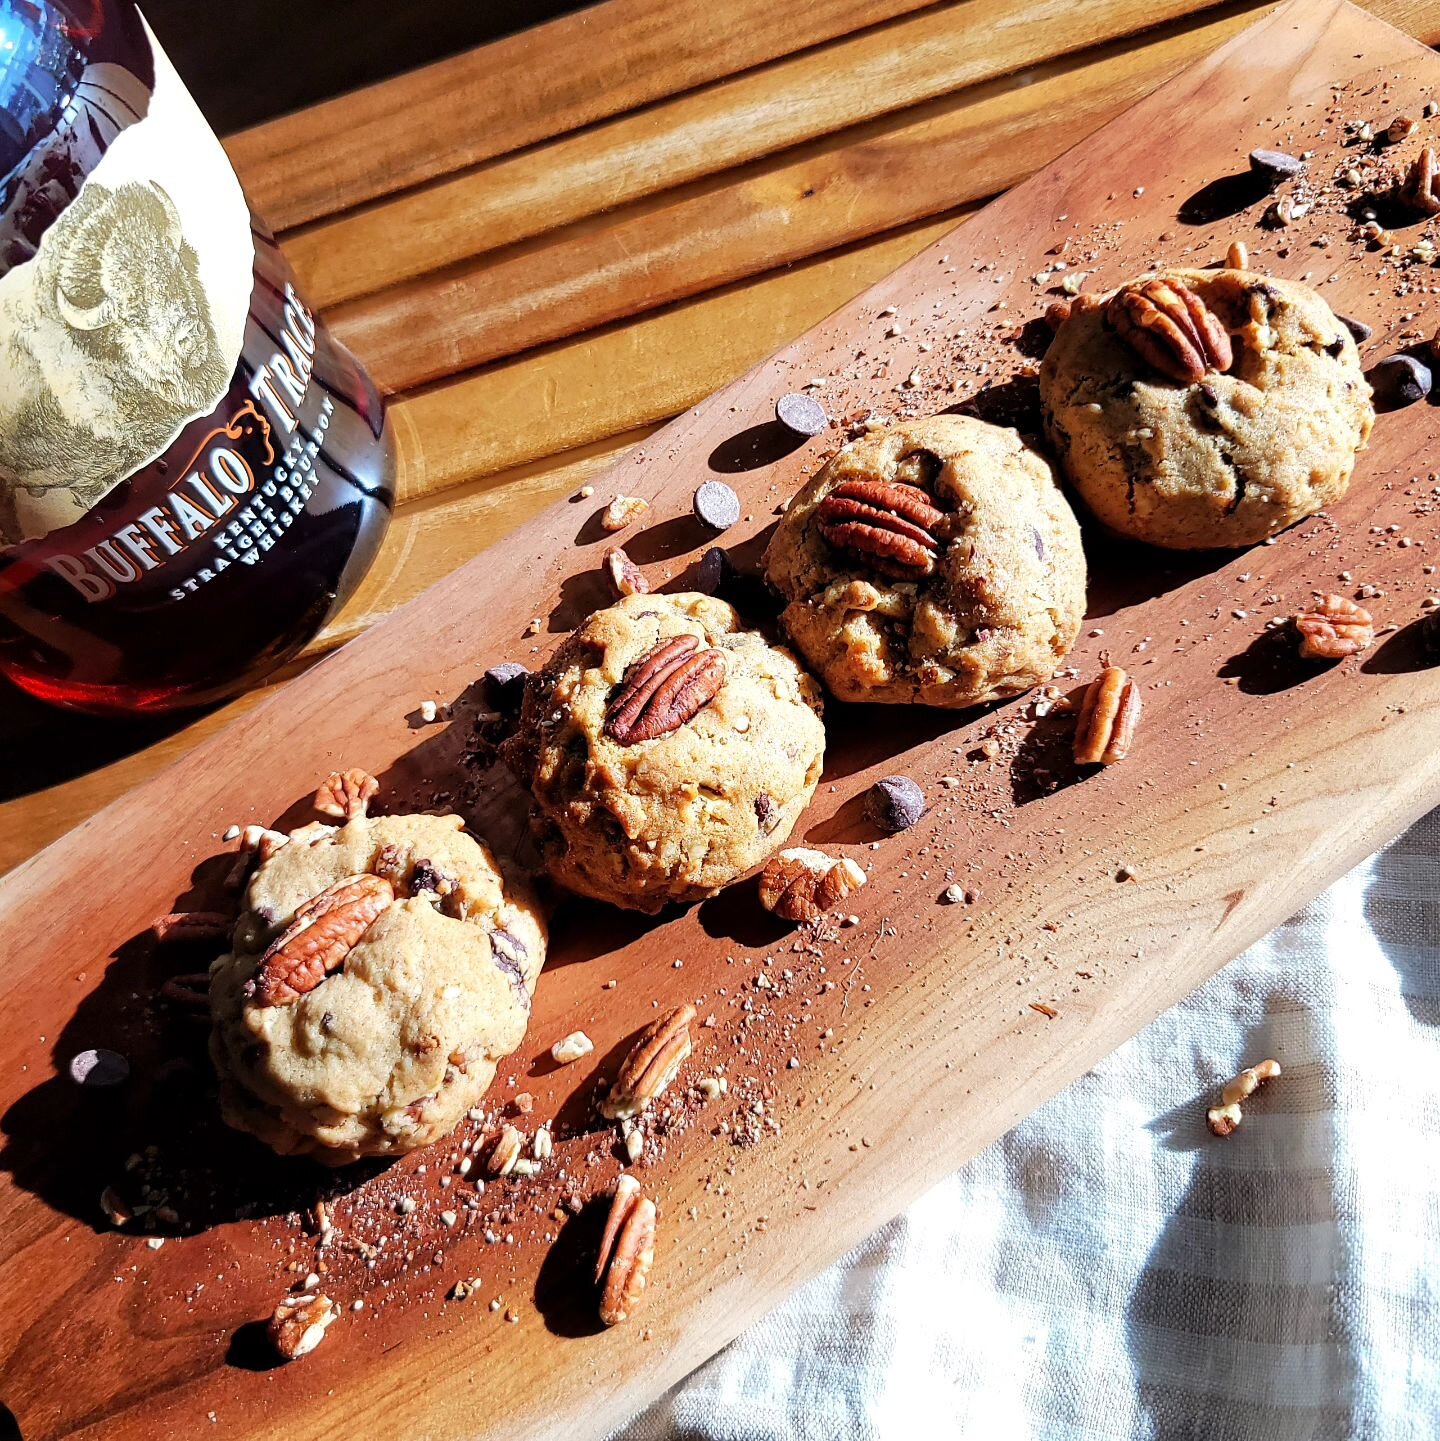 🍪Brown Butter Bourbon Pecan Chocolate Chip Cookies🍪

A definite crowd pleaser and a #1 seller. This cookie is soft and chewy with an amazing flavor combination! 

The richness of the browned butter, aroma of Buffalo Trace Bourbon, a hint of cinnamo